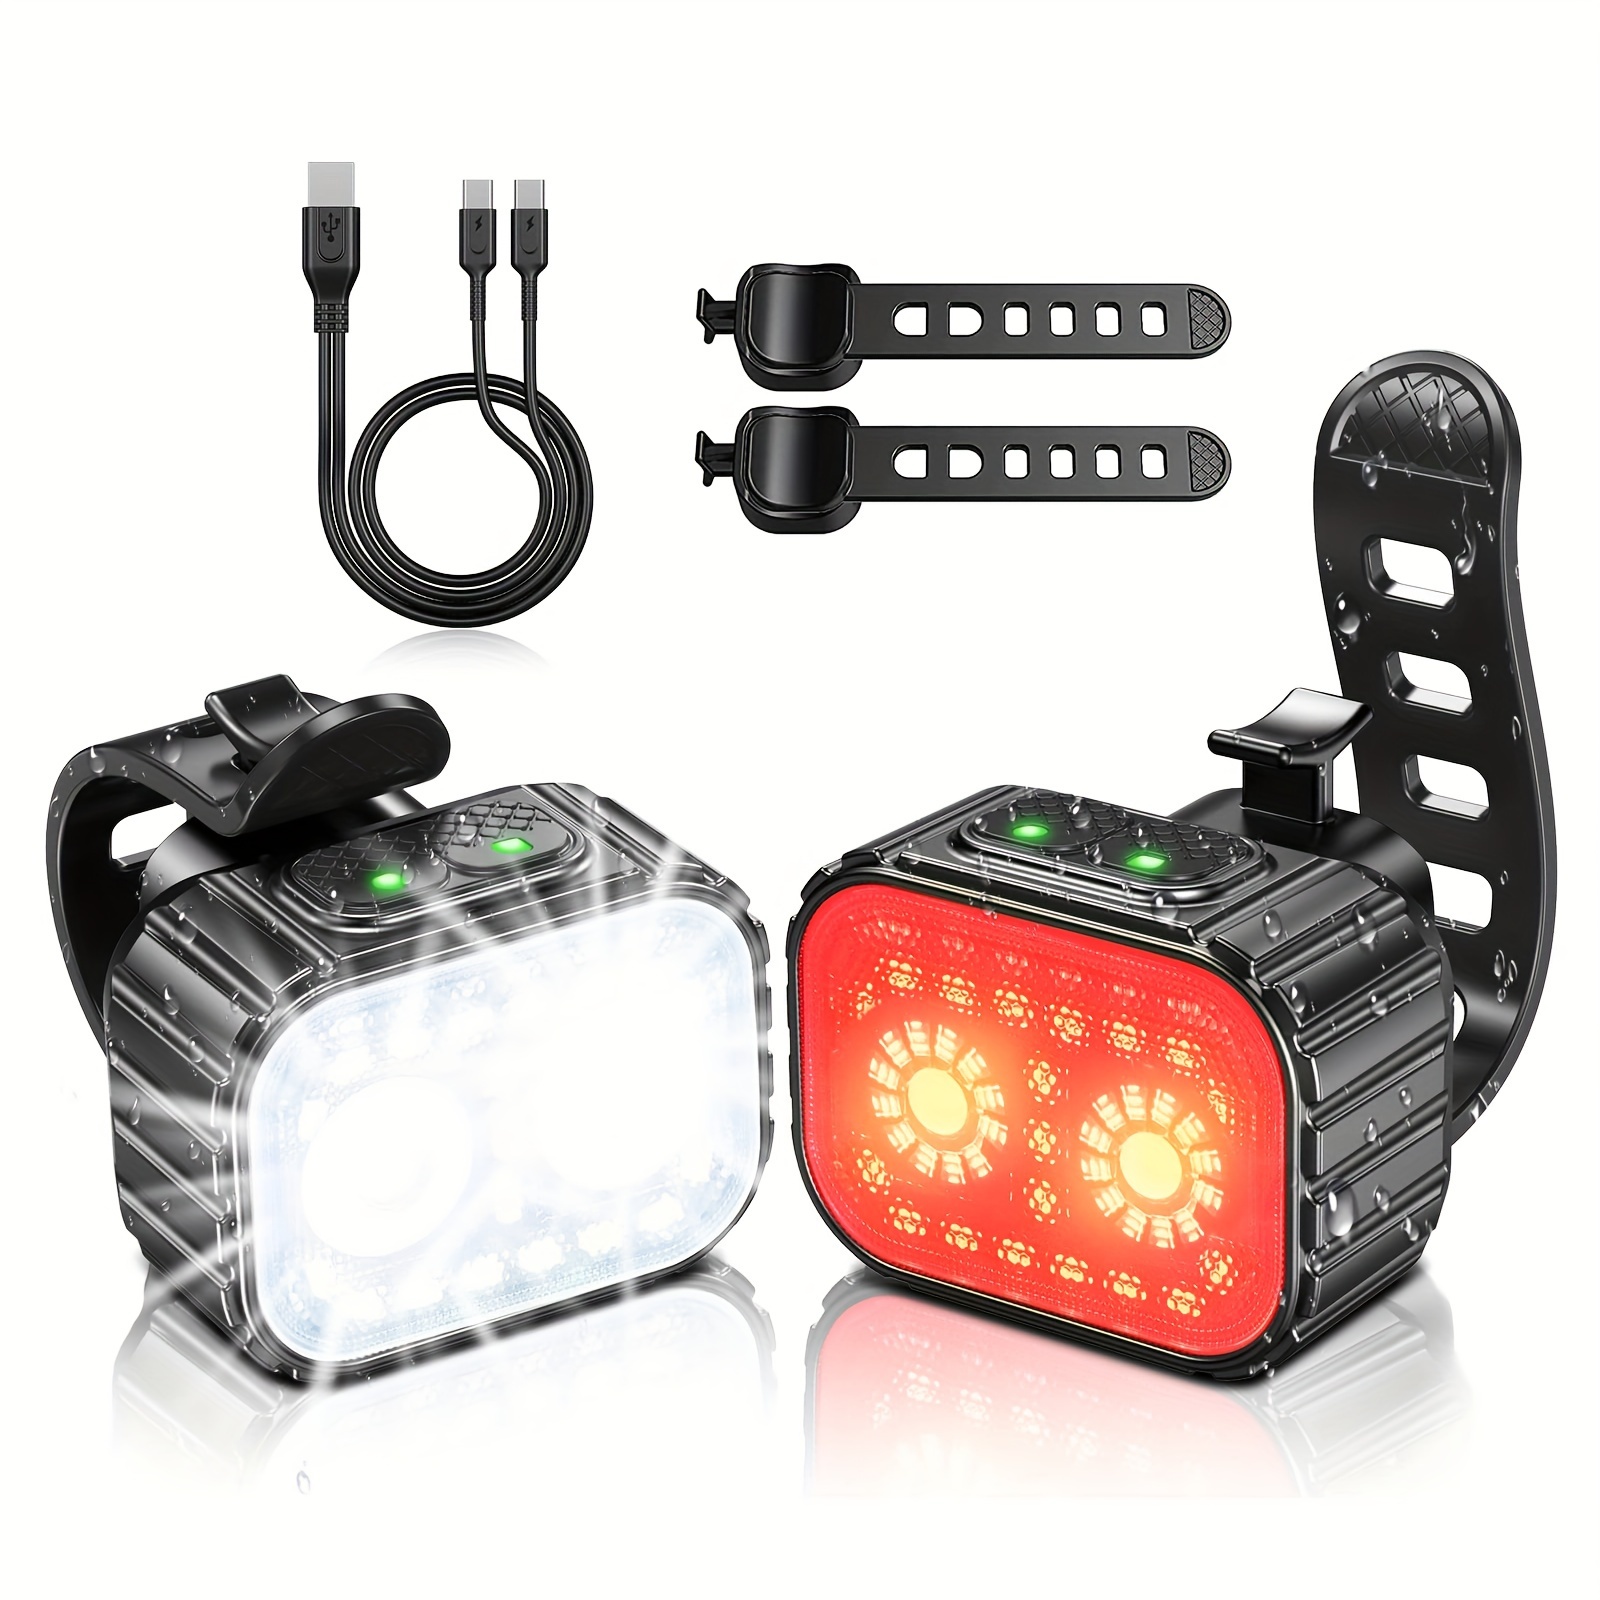 

Ultra Bright Rechargeable Bike Light Set, Front And Rear Lights For Night Riding, 8/12 Modes, 58 Hours Runtime